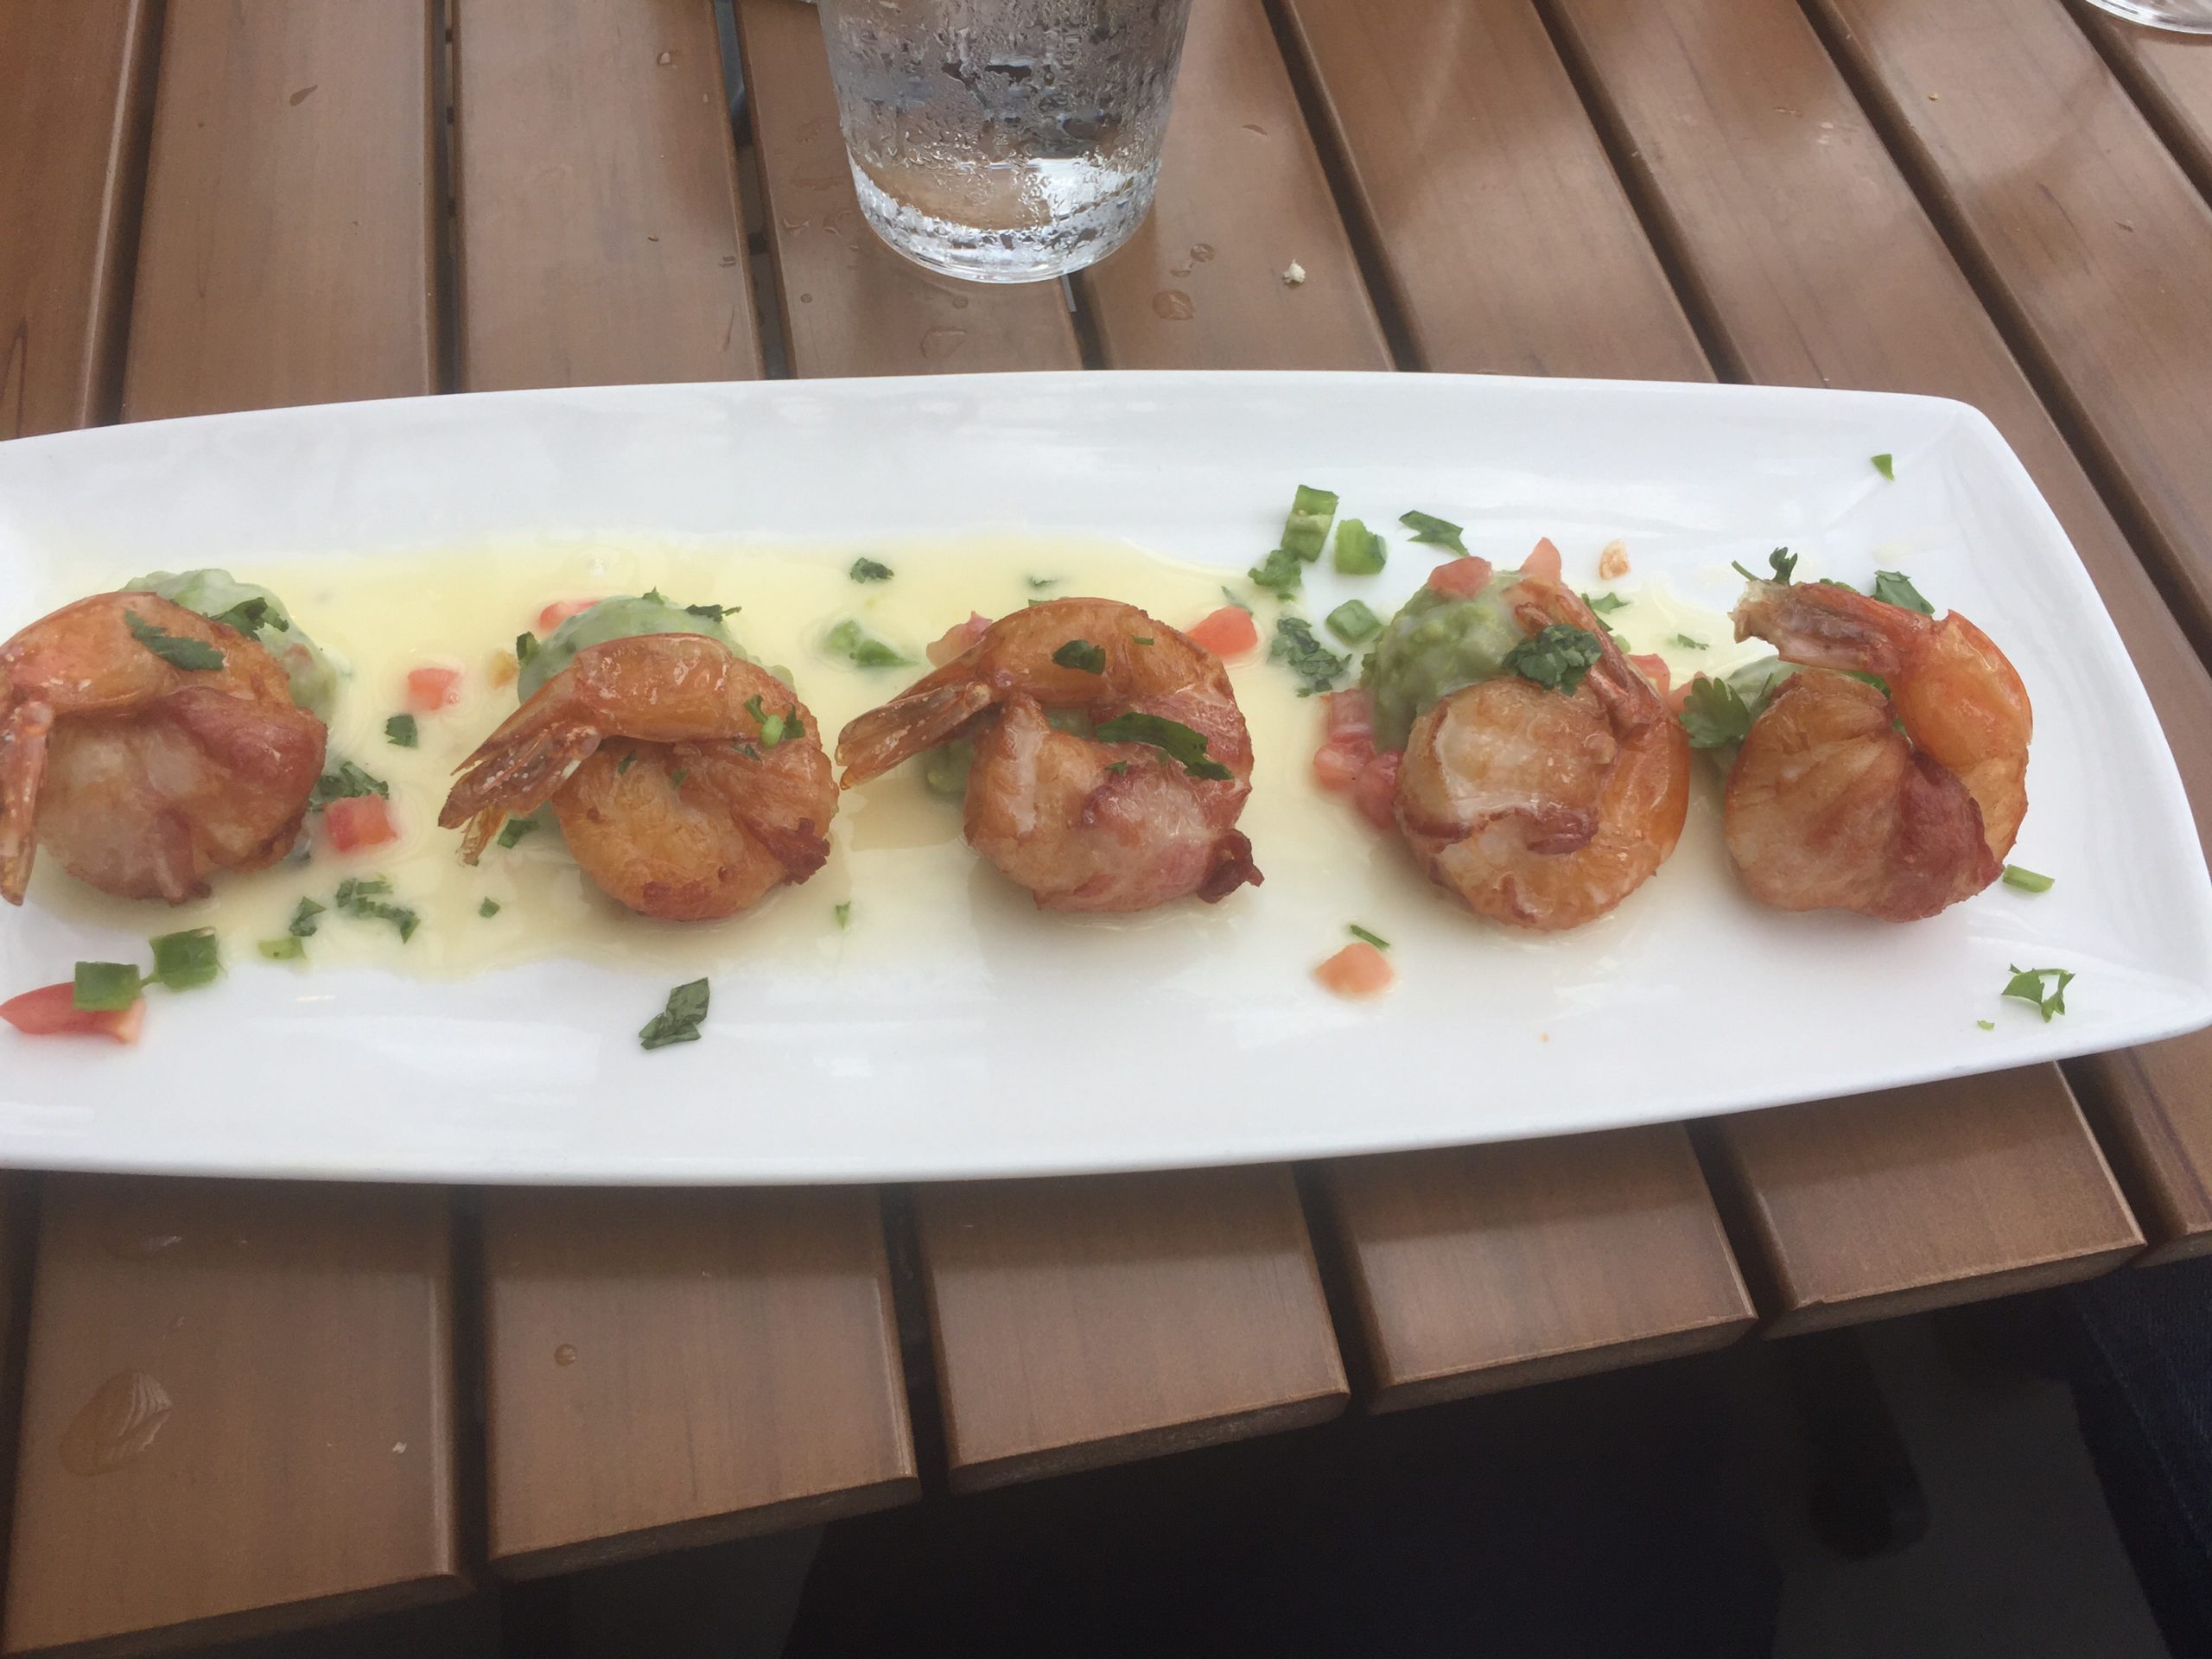 Mexican Drunken Shrimp appetizer at Cooper's Hawk Winery, read about it @ tipsychocochip.com